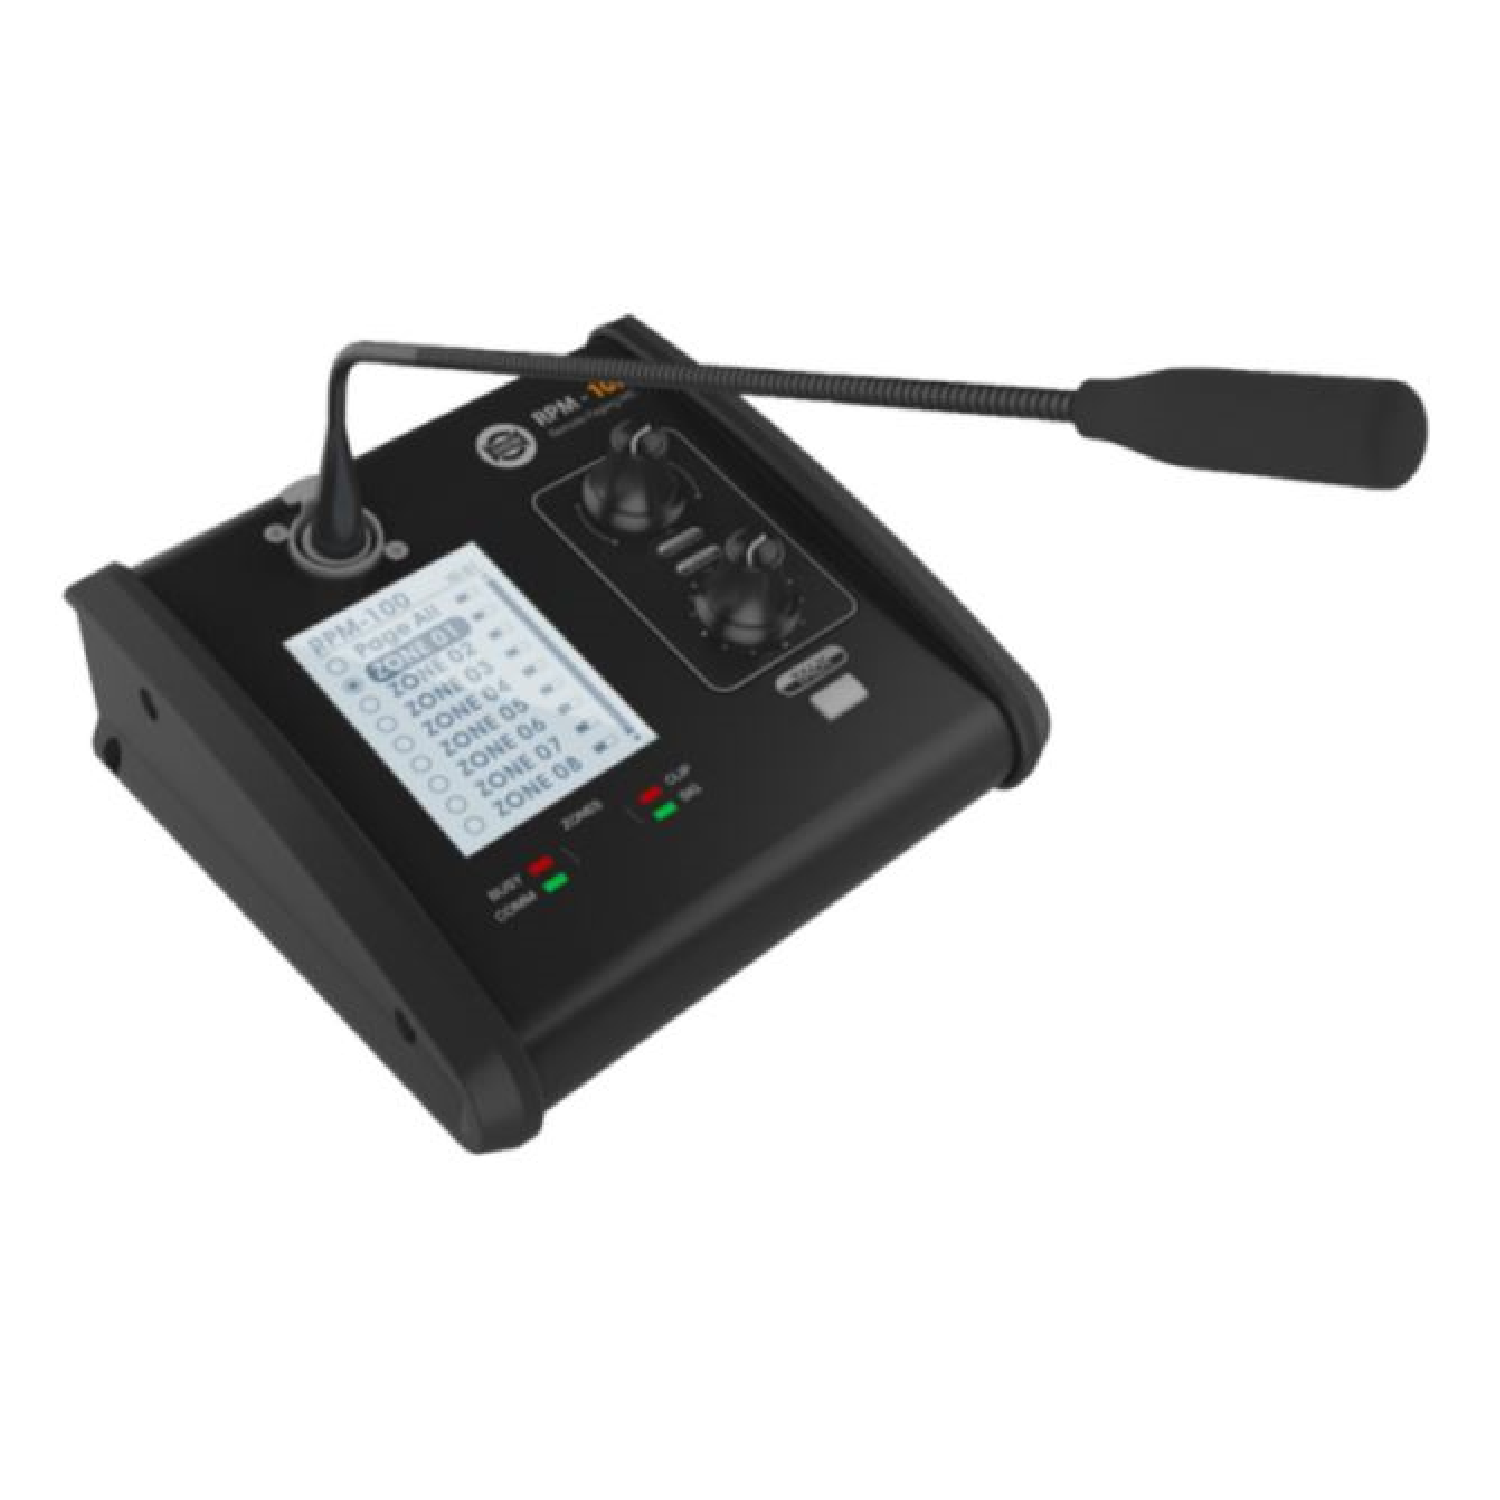 Paging Microphone Station Up to 32 Zones with Several MATRIX A8 with Zone LCD Display, USB and RD Port, 100 m Cable Length   RPM 200 show